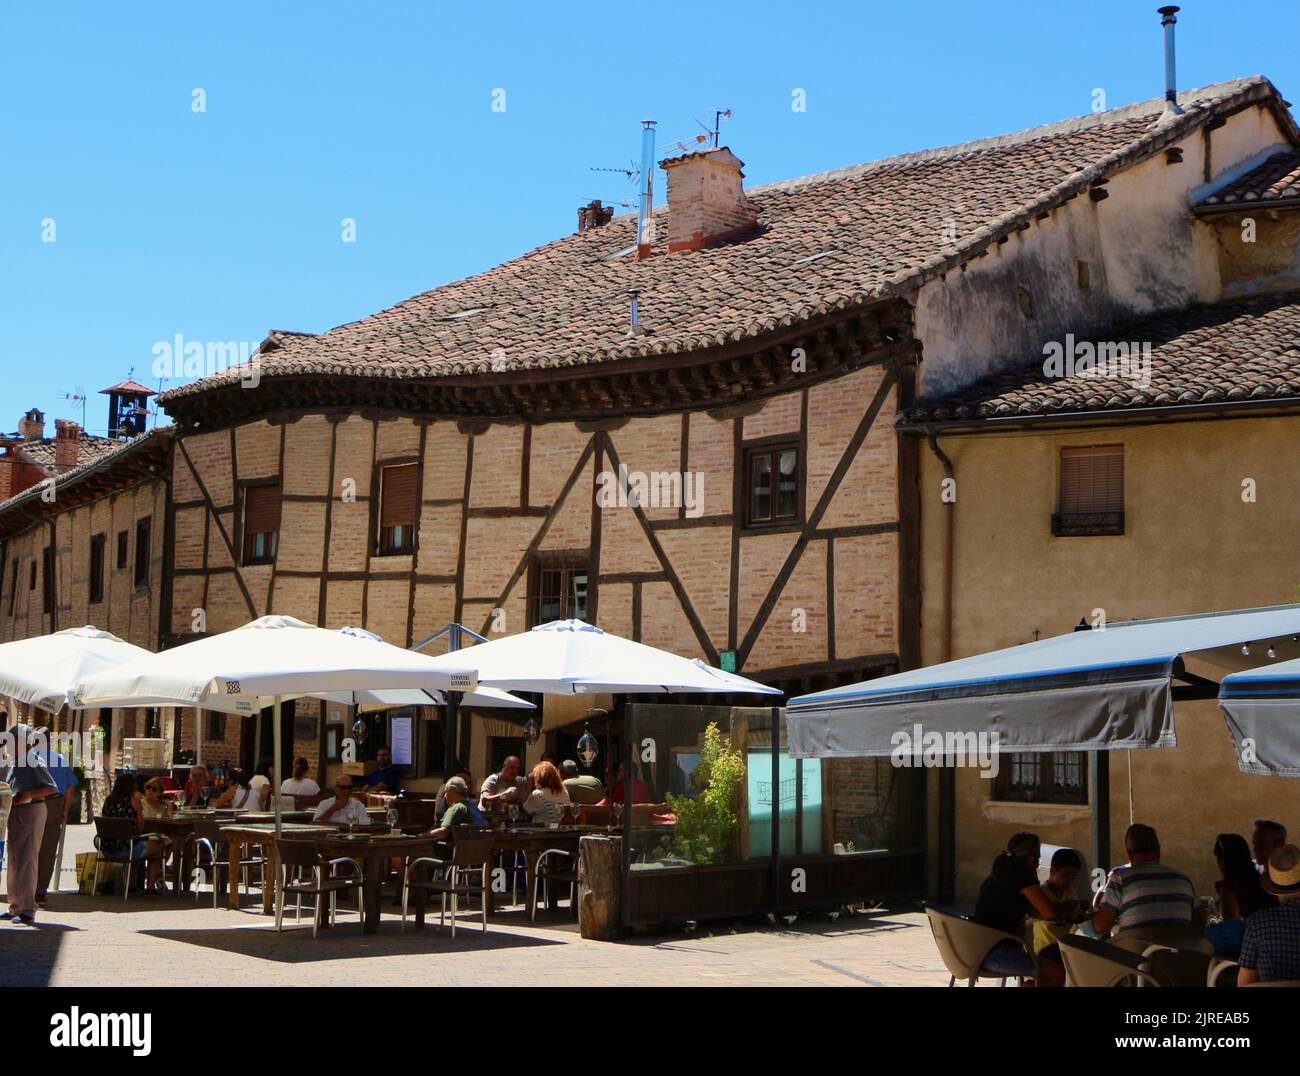 Terrace outside the Crooked house restaurant at lunchtime on a hot August day Saldaña Palencia Castile and Leon Spain Stock Photo